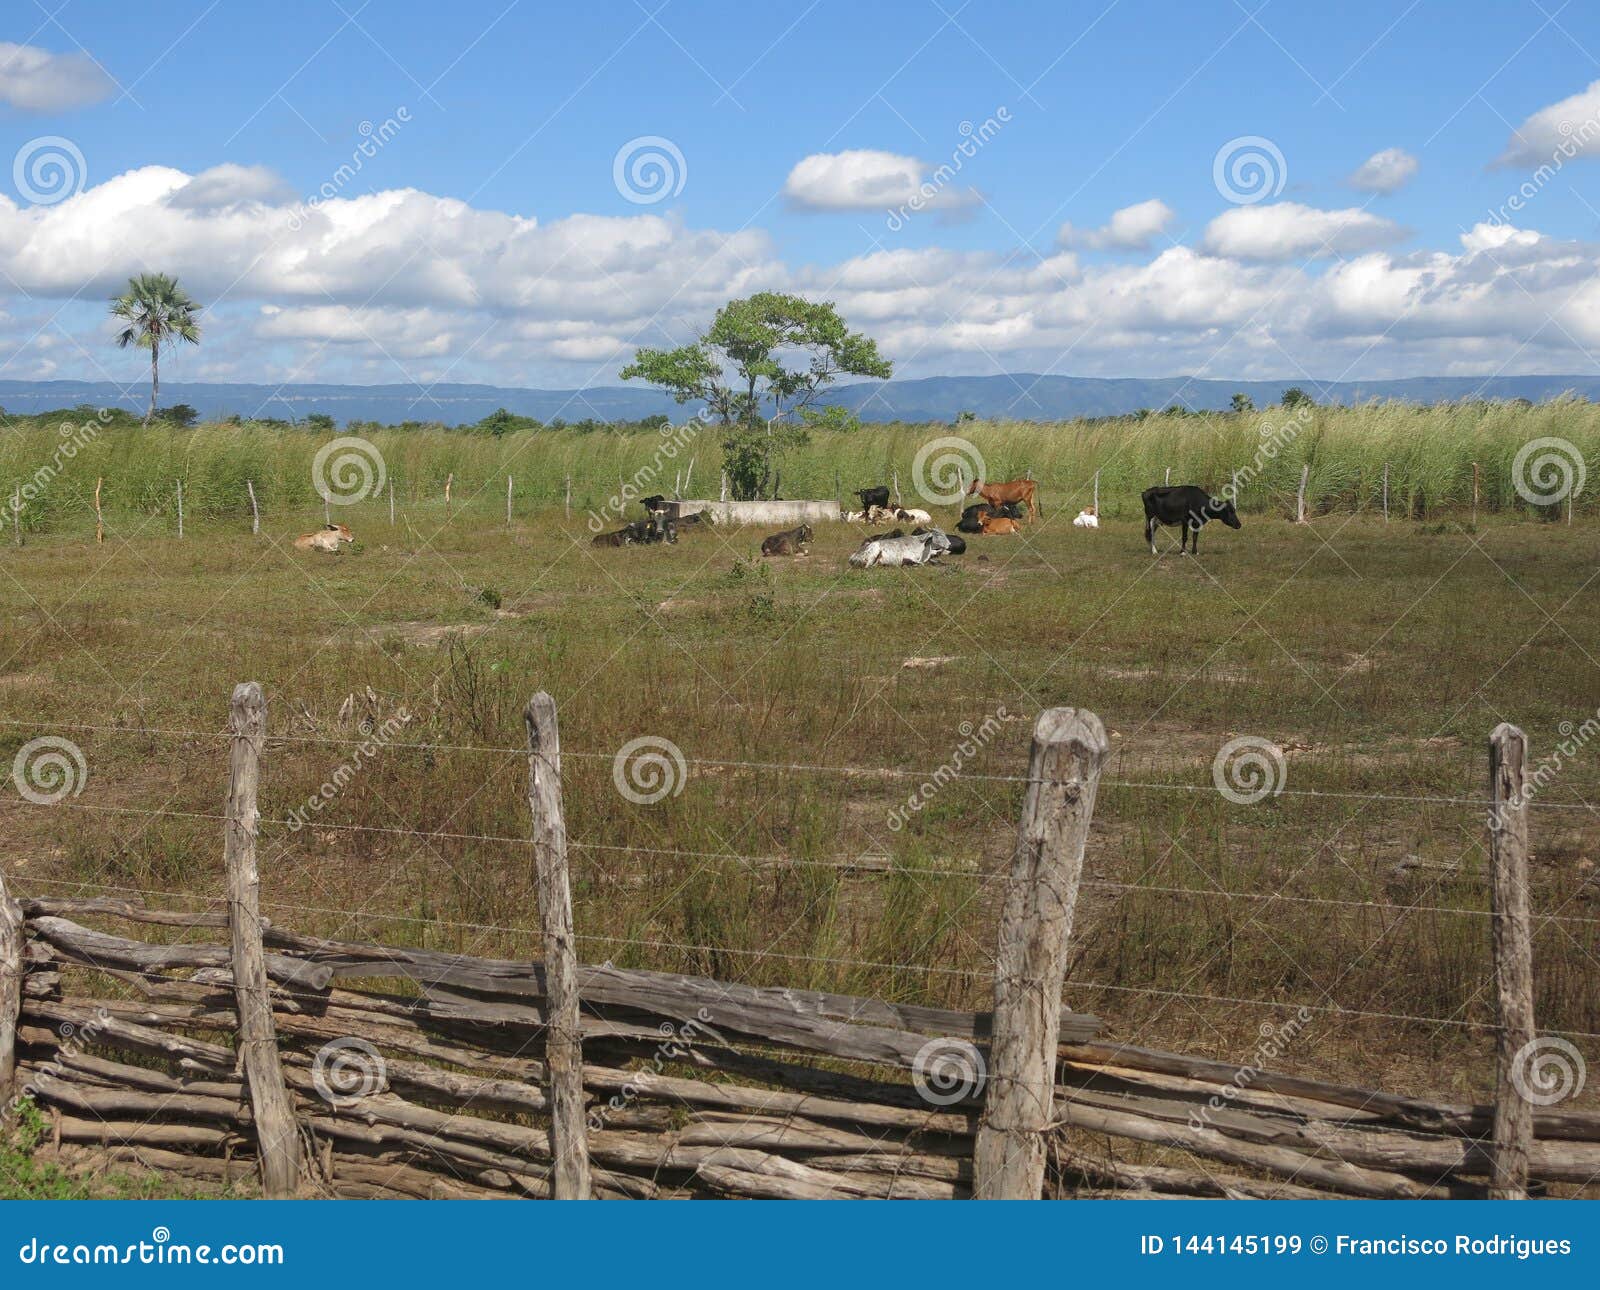 cattle breeding in the interior of cearÃÂ¡